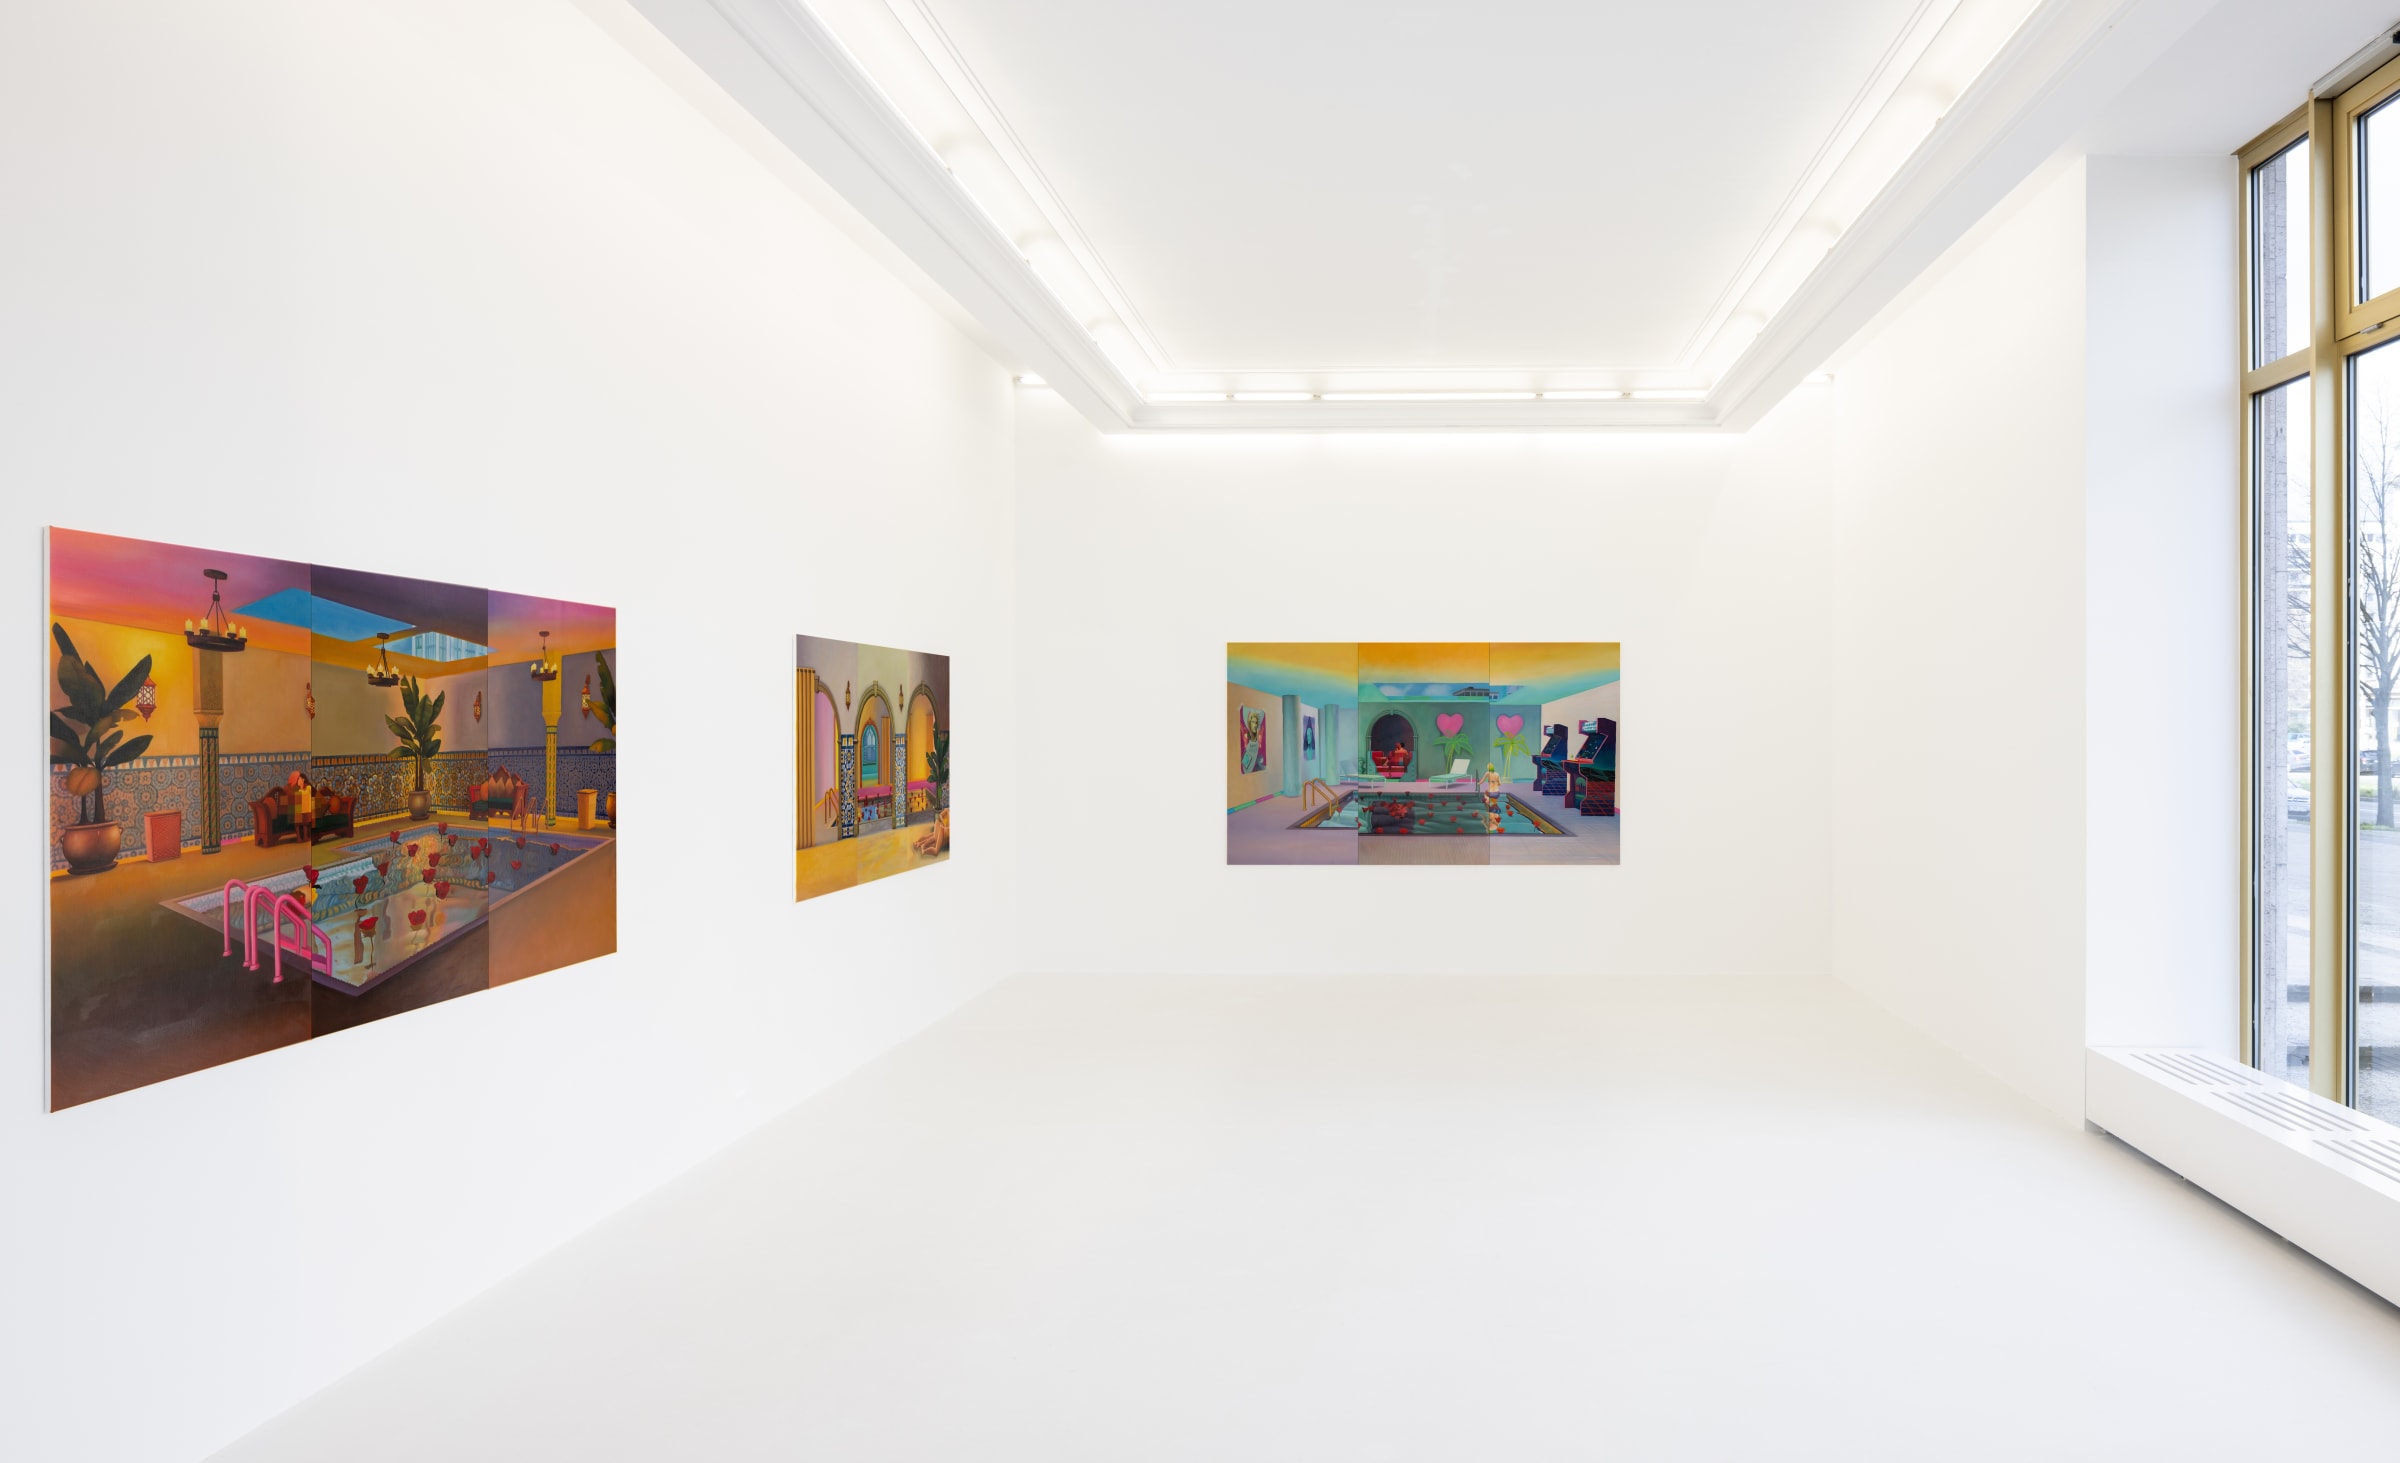 Mak2 Love Pool Installation View March 24 – April 21, 2023 Peres Projects, Berlin Photographed by: Timo Ohler